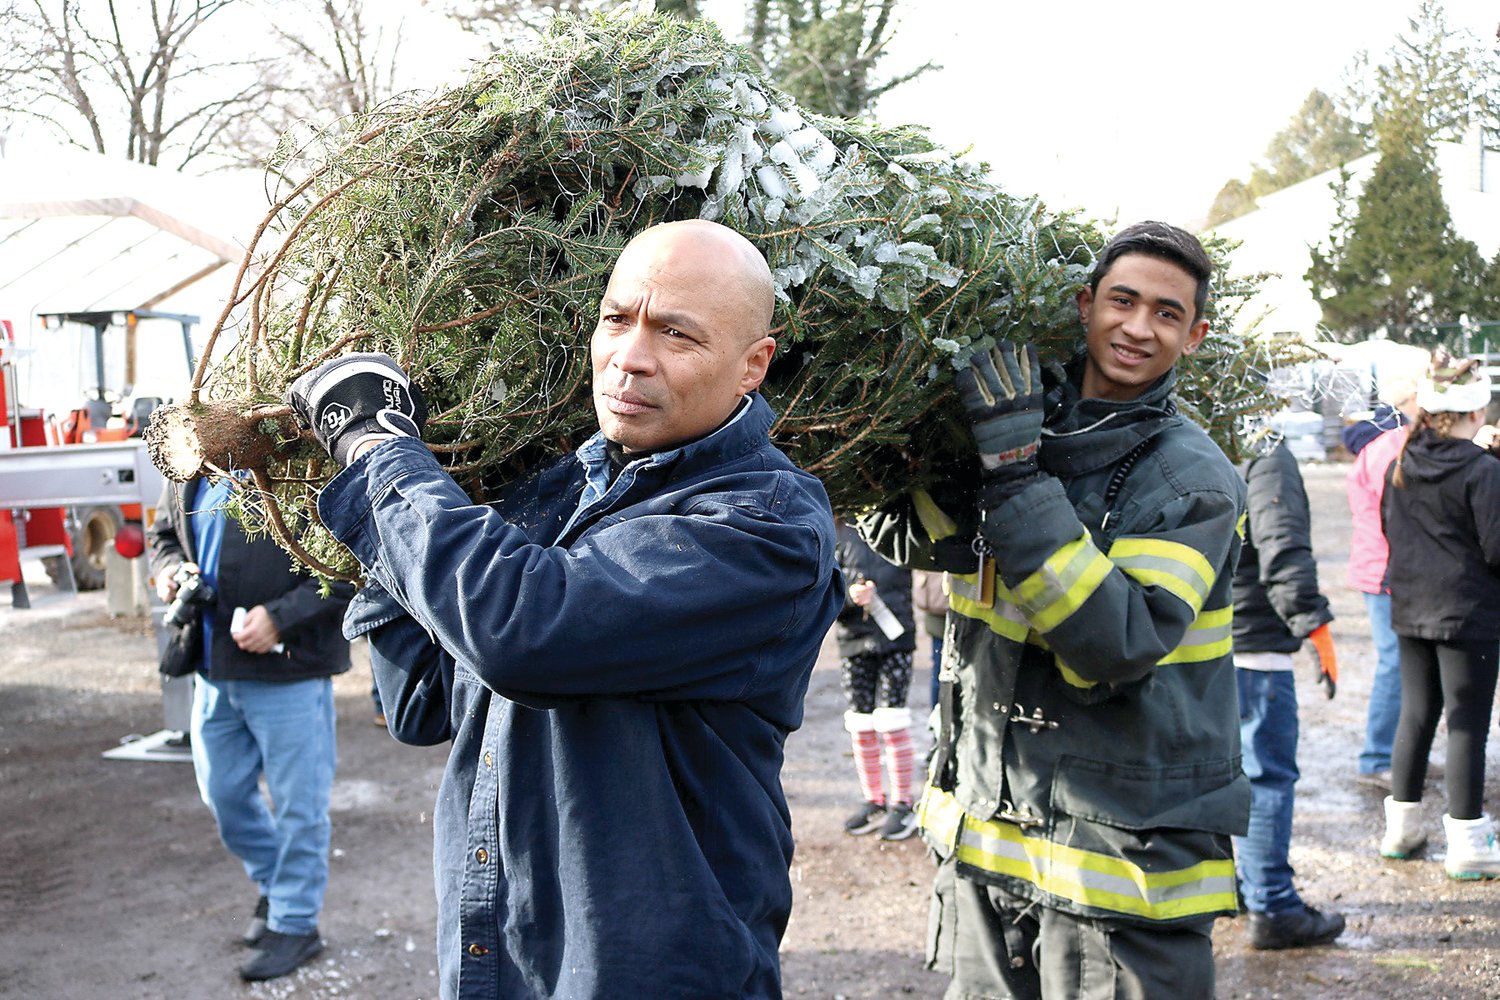 Michael Soriano, the mayor of Parsipanny, N.J. (front), and an unidentified volunteer firefighter help load Christmas trees for Trees for Troops into a Federal Express truck.